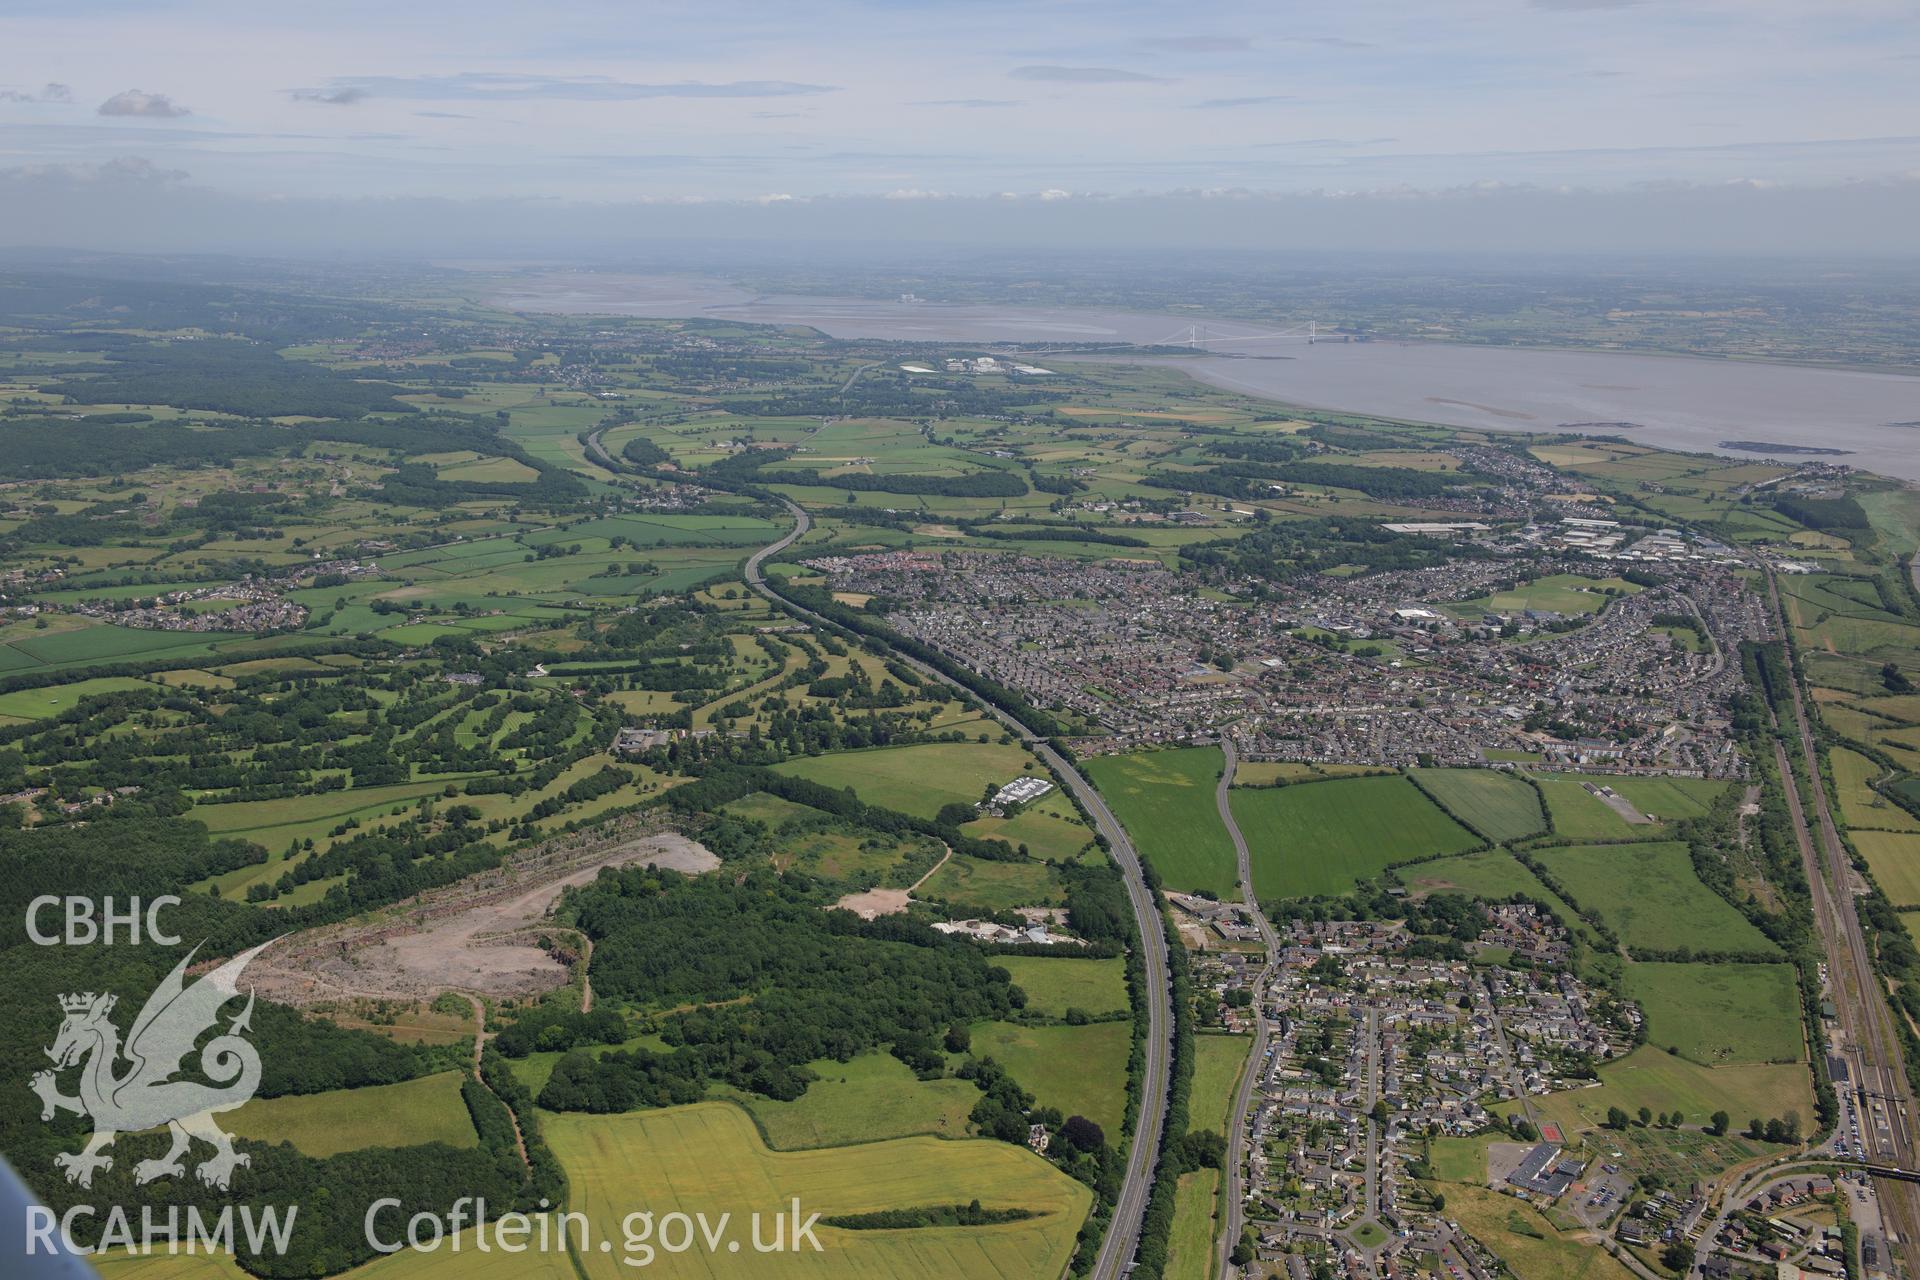 The village of Rogiet and the town of Caldicot beyond, with the M48 motorway to the north and the M4 motorway, the Great Western Railway and the Severn Railway Tunnel to the south. Oblique aerial photograph taken during the Royal Commission's programme of archaeological aerial reconnaissance by Toby Driver on 29th June 2015.